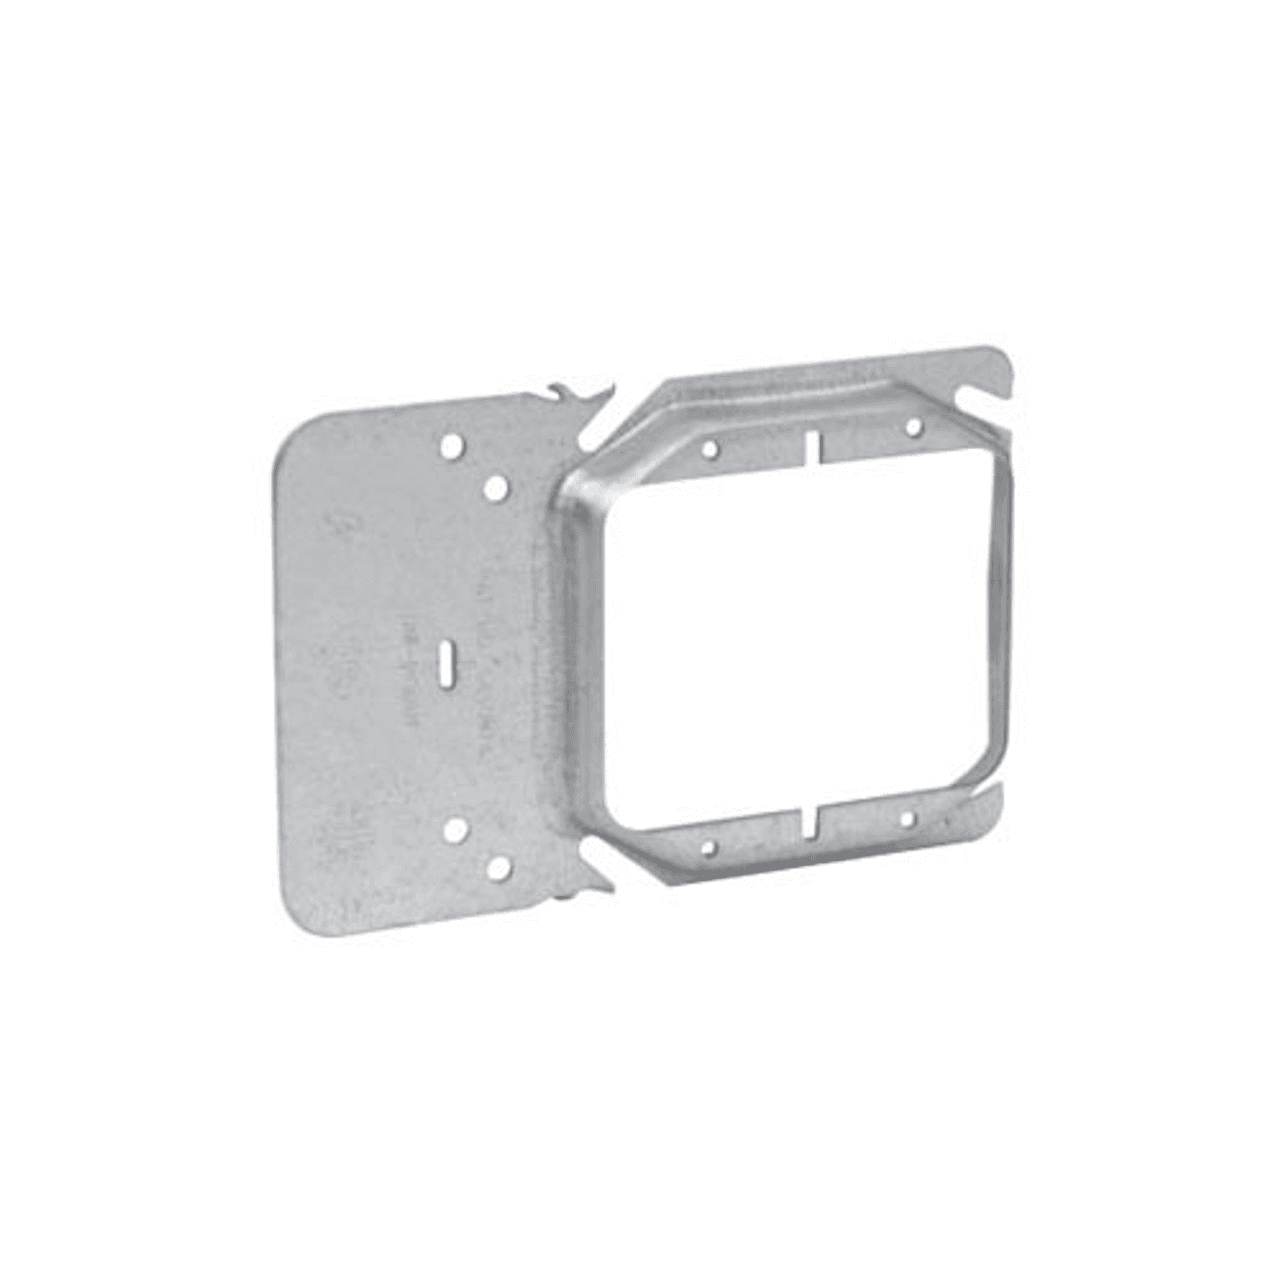 Eaton TP35000 Eaton Crouse-Hinds series Uni-Mount Cover, 4", Raised surface, Steel, Two-gang, 1/2" raised, 6.0 cubic inch capacity